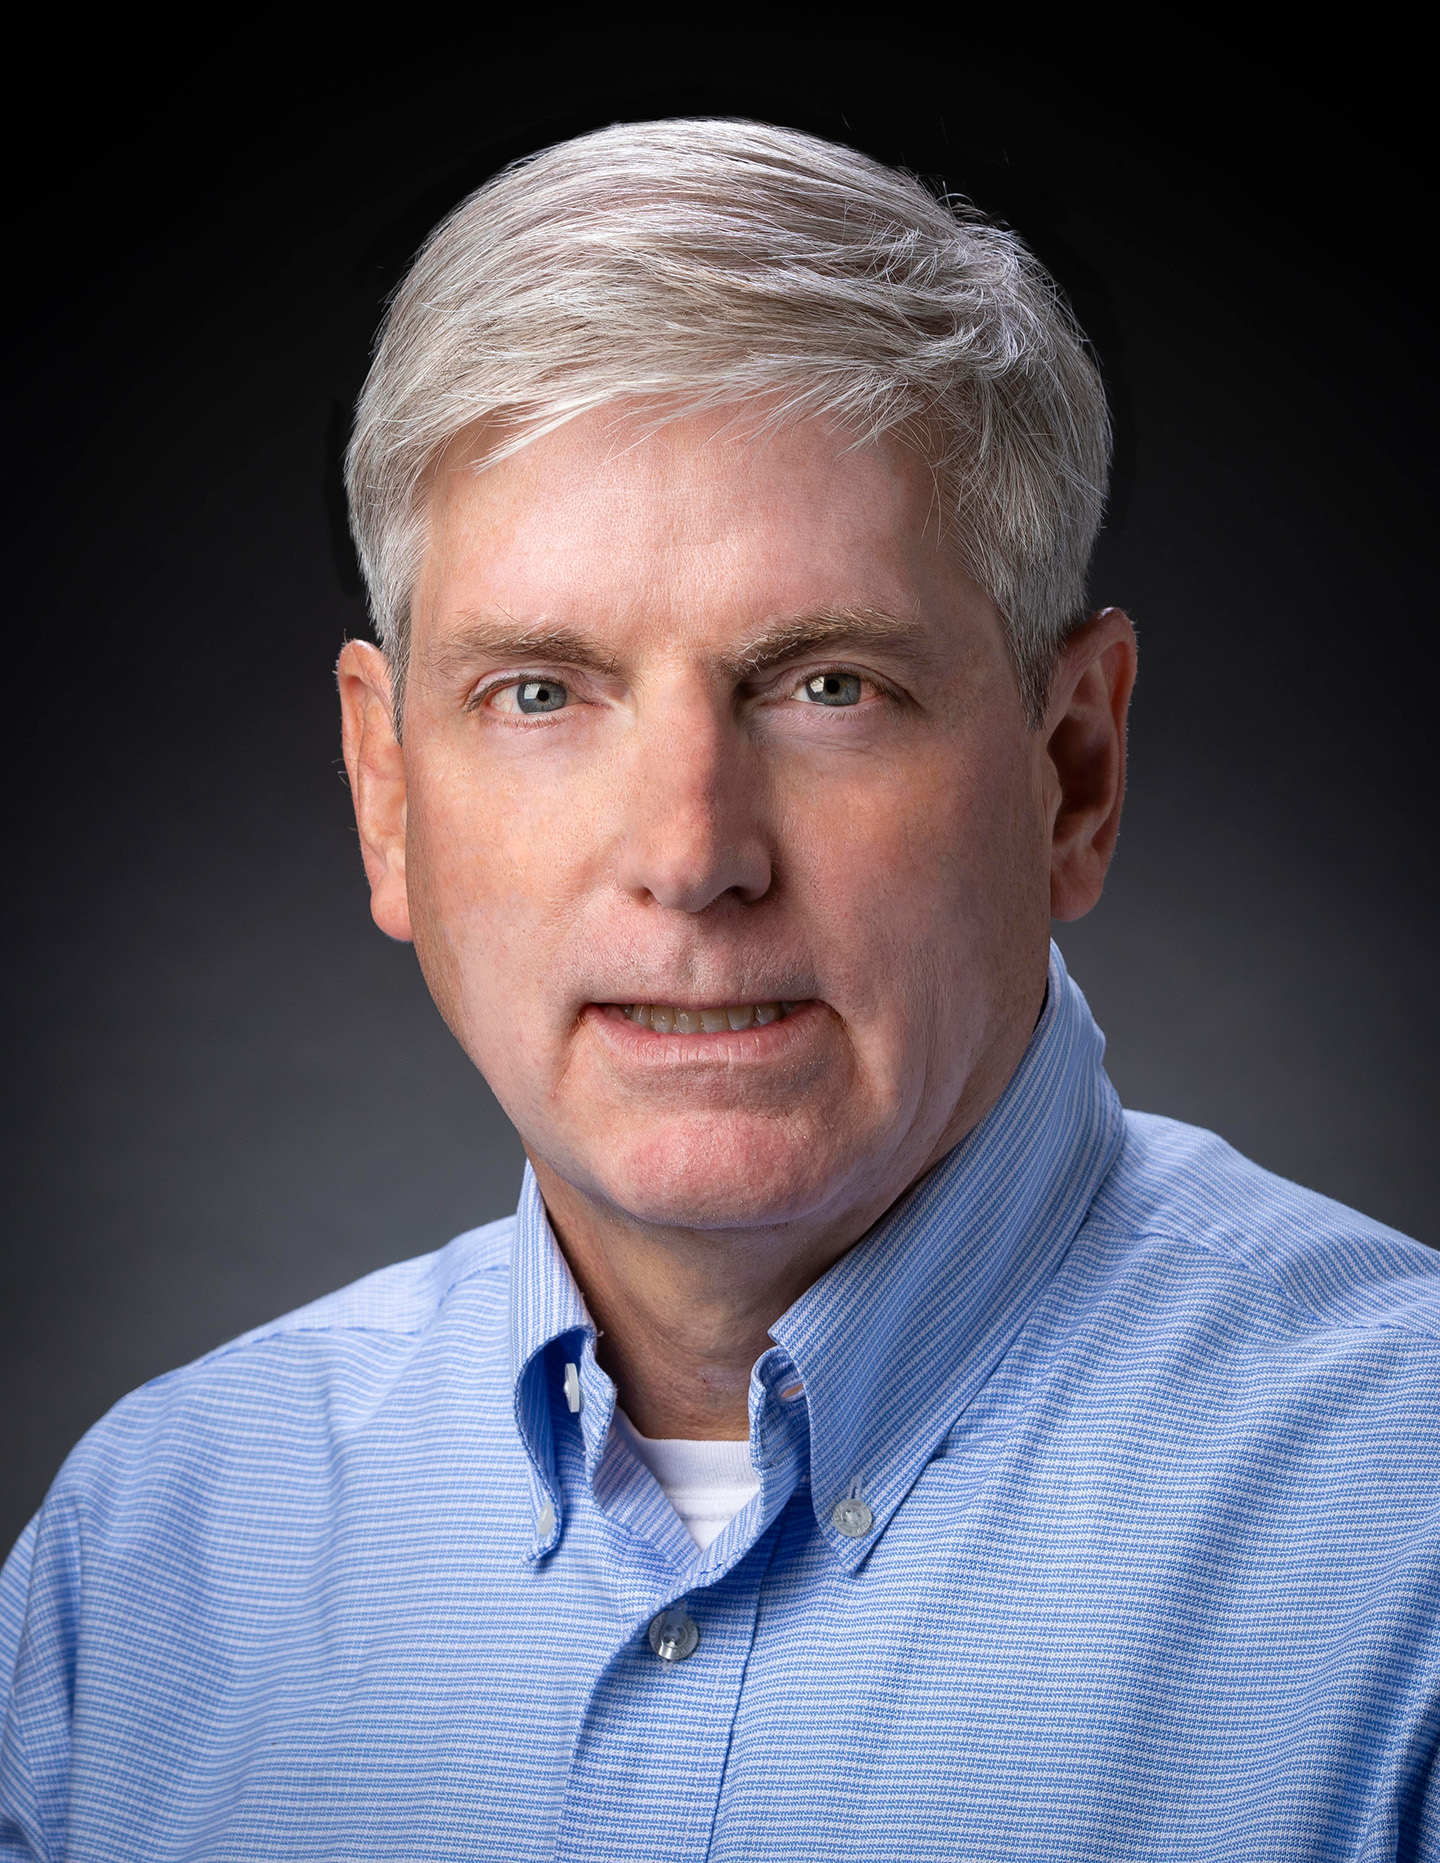 Head shot photo of Ed Reynolds, in a blue collared shirt